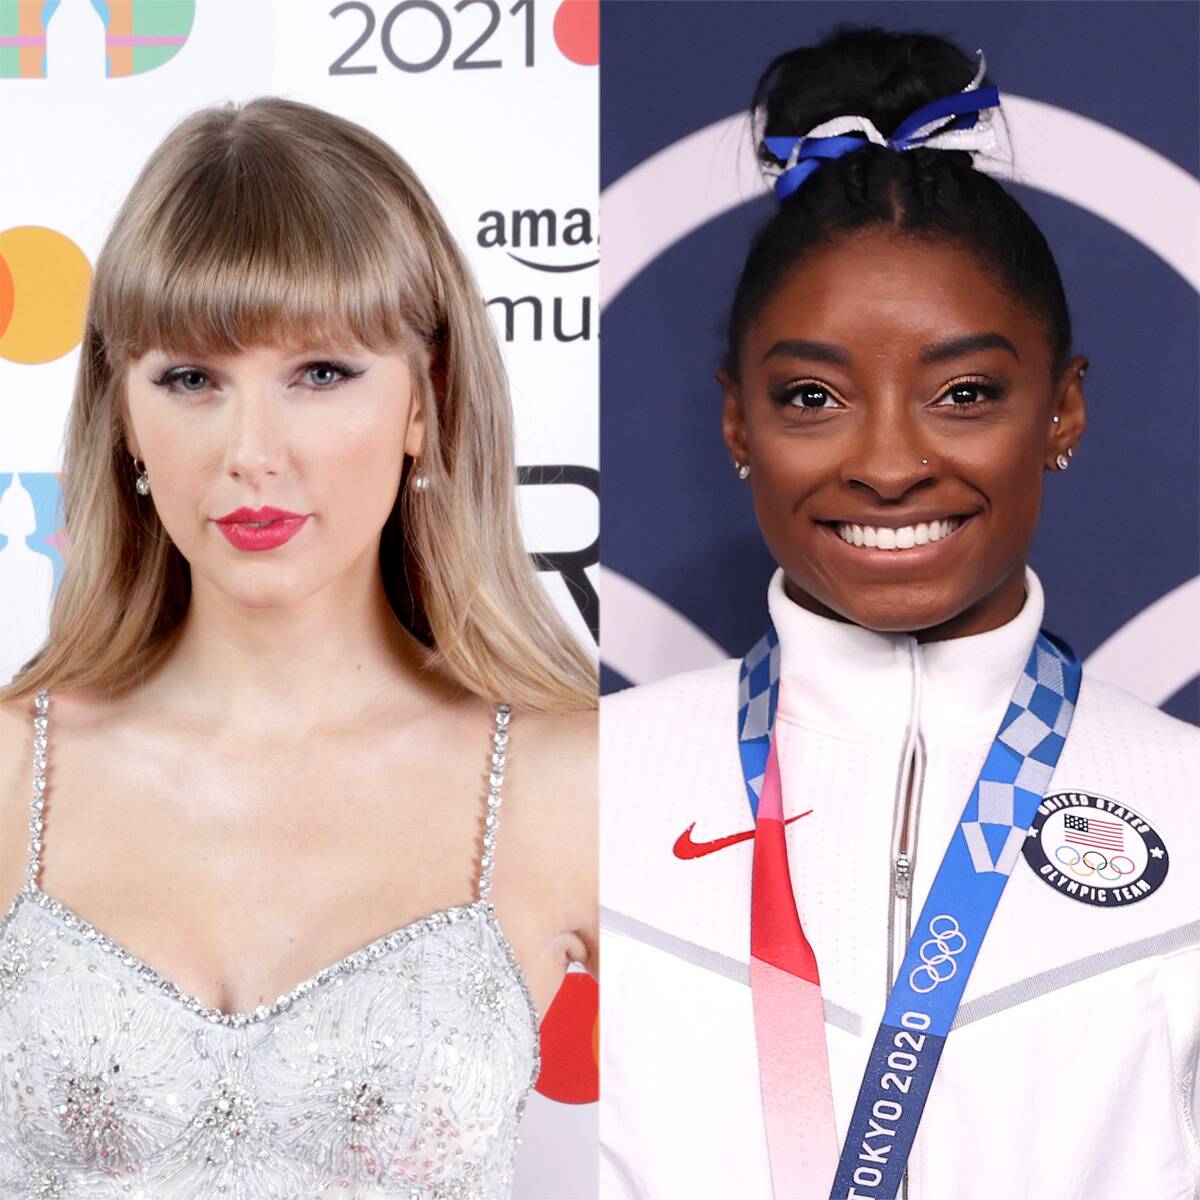 Taylor Swift Tells Simone Biles She "Cried" Seeing Her "Resilience" at the Tokyo Olympics